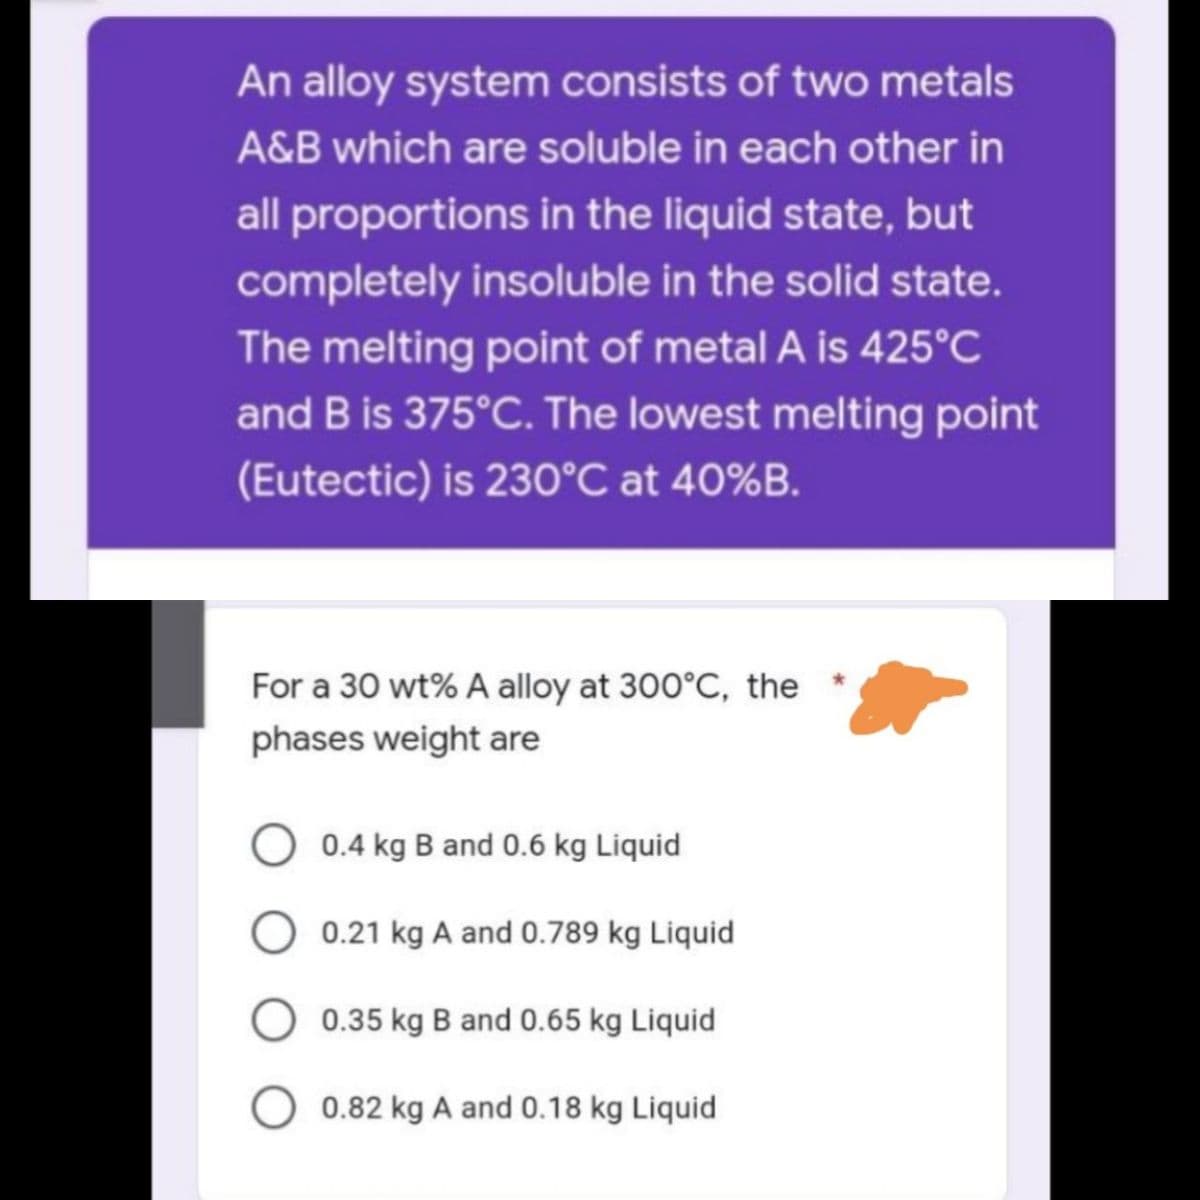 An alloy system consists of two metals
A&B which are soluble in each other in
all proportions in the liquid state, but
completely insoluble in the solid state.
The melting point of metal A is 425°C
and B is 375°C. The lowest melting point
(Eutectic) is 230°C at 40%B.
For a 30 wt% A alloy at 300°C, the
phases weight are
O 0.4 kg B and 0.6 kg Liquid
O 0.21 kg A and 0.789 kg Liquid
0.35 kg B and 0.65 kg Liquid
0.82 kg A and 0.18 kg Liquid